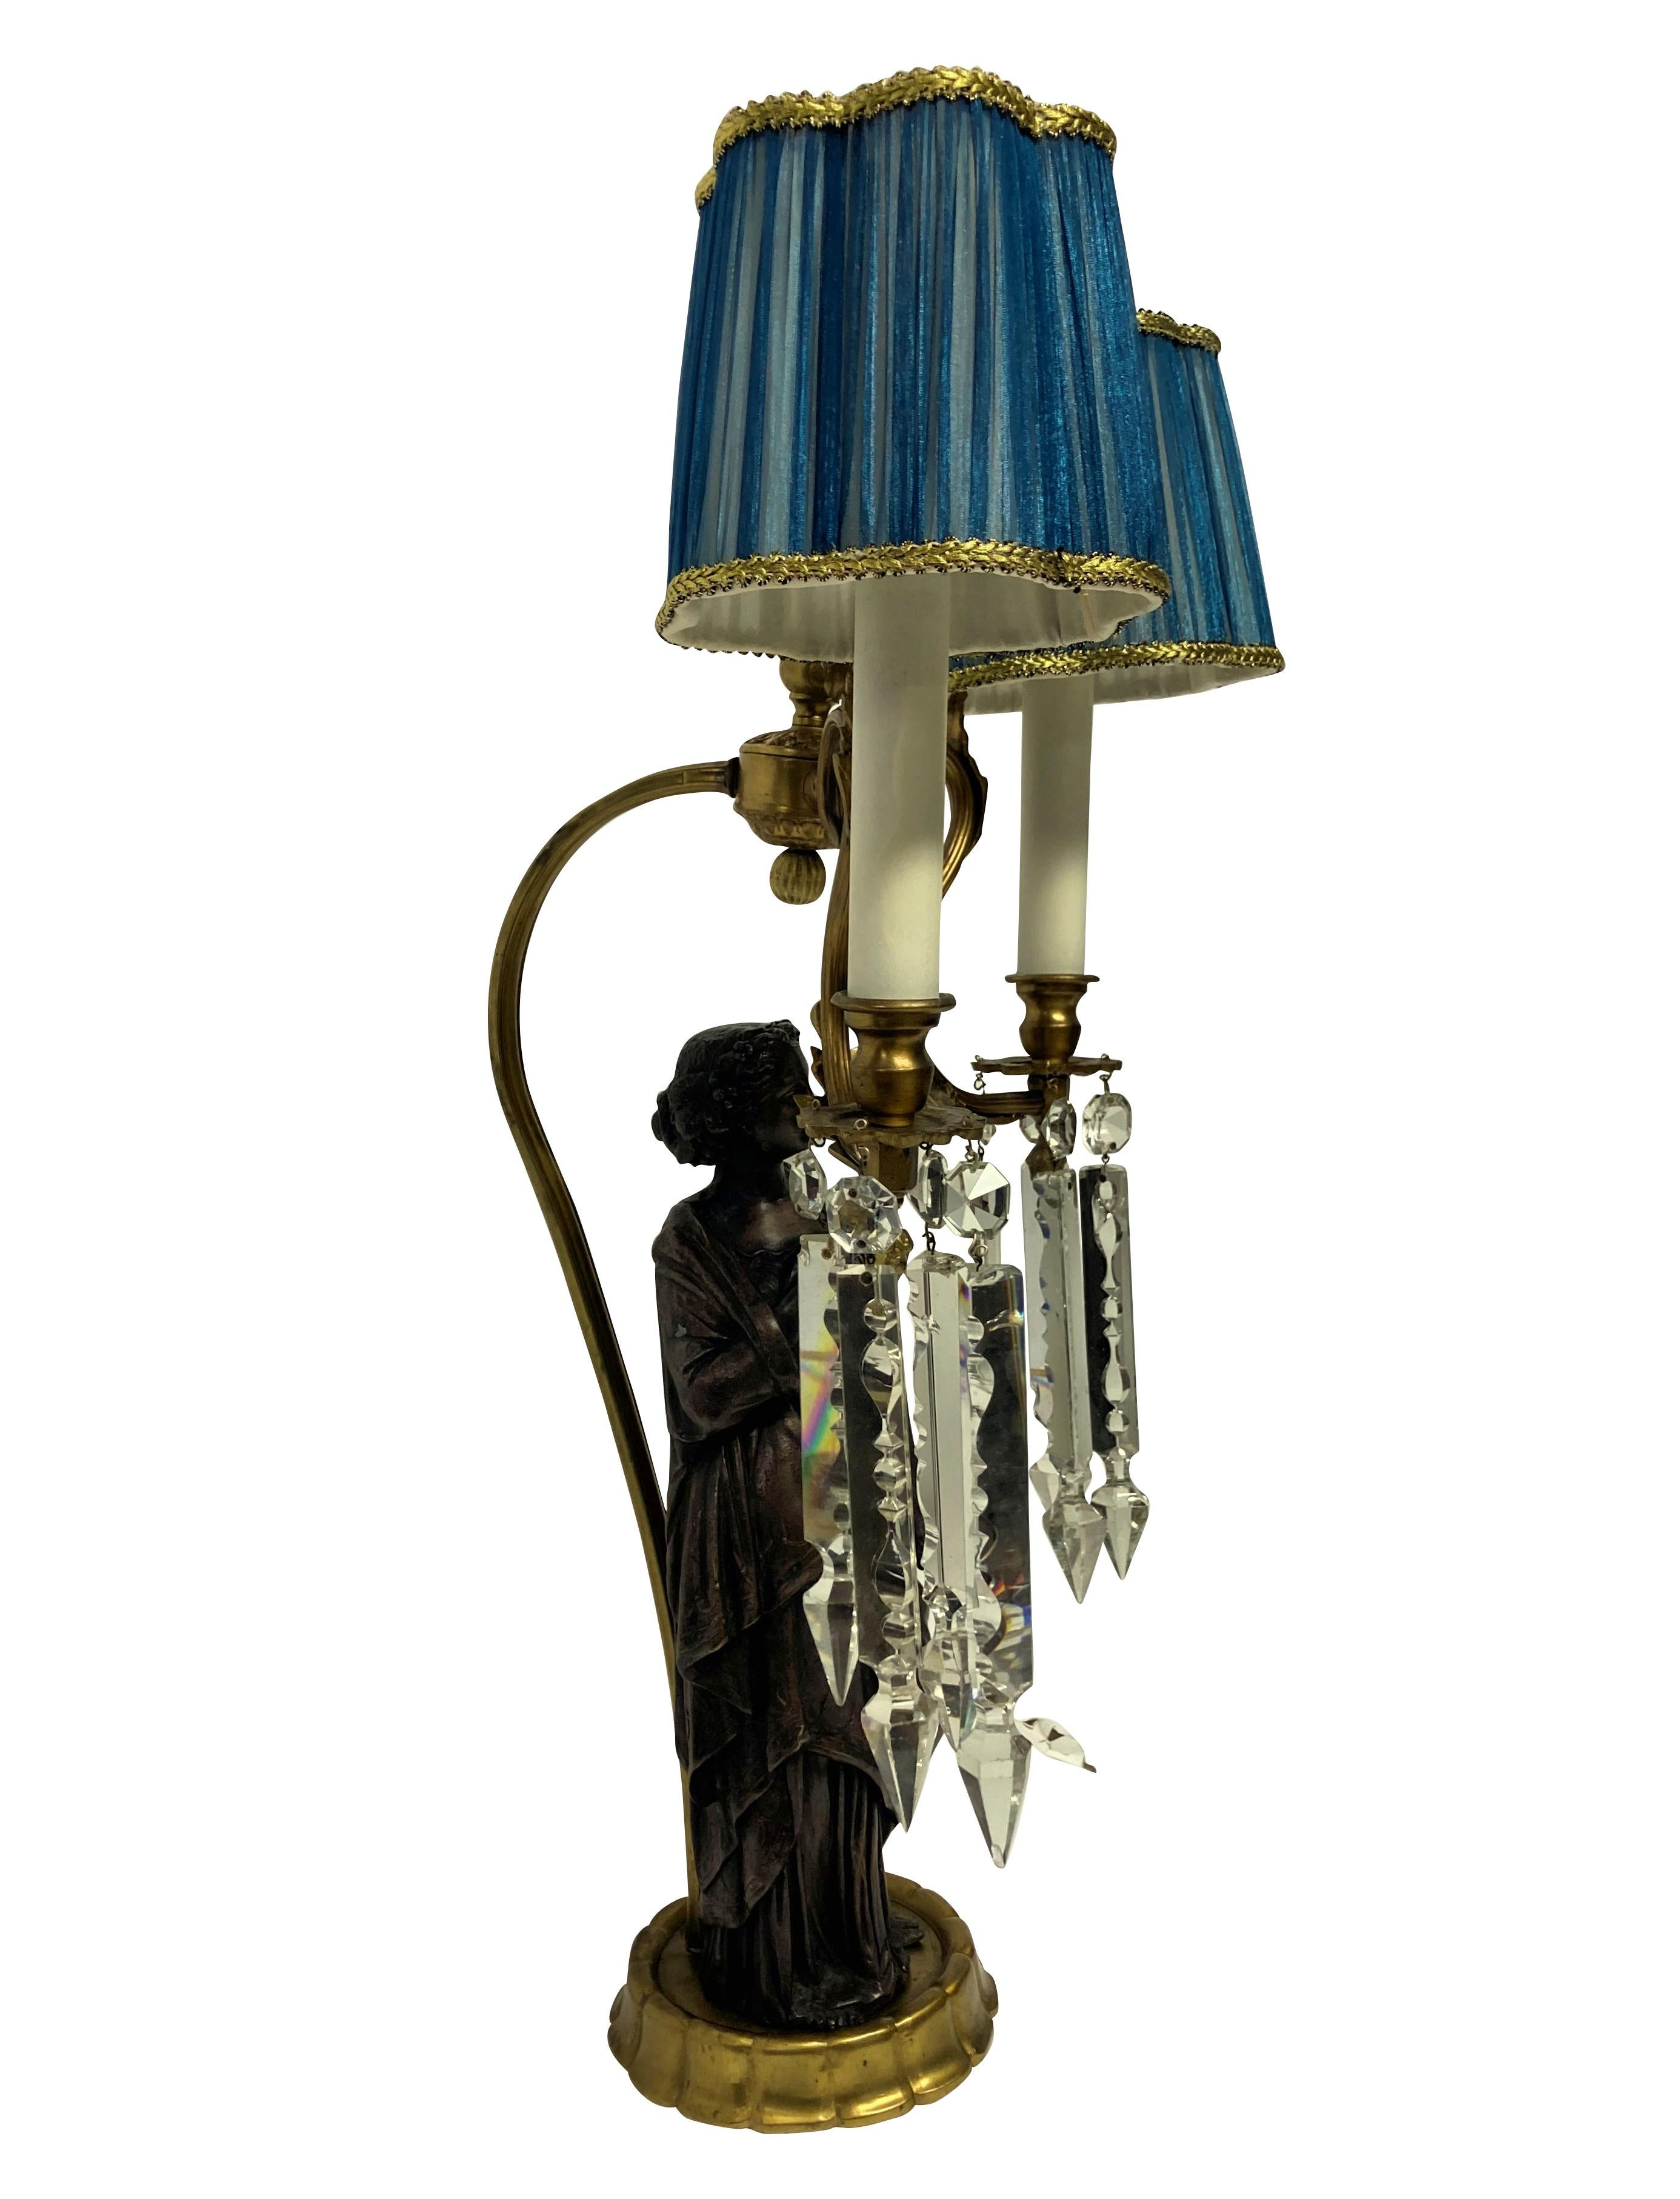 A pair of Italian Classical figural lamps depicting woman in Roman dress, each with cut glass pendant drops and with pale blue silk shades.